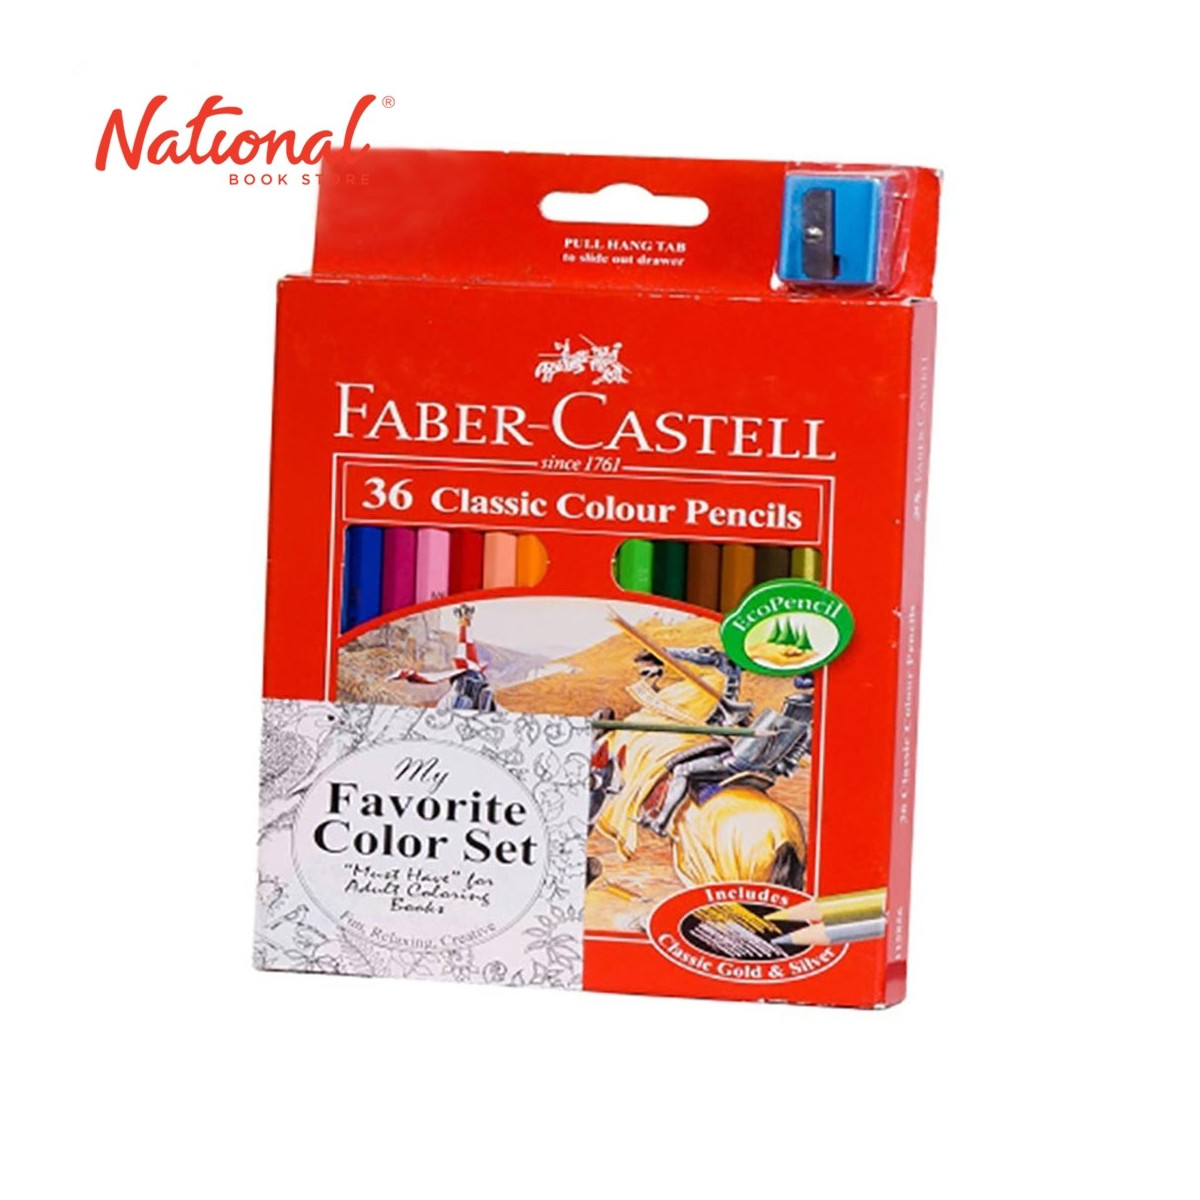 FABER-CASTELL CLASSIC COLORED PENCIL 12115856 36 COLORS LONG